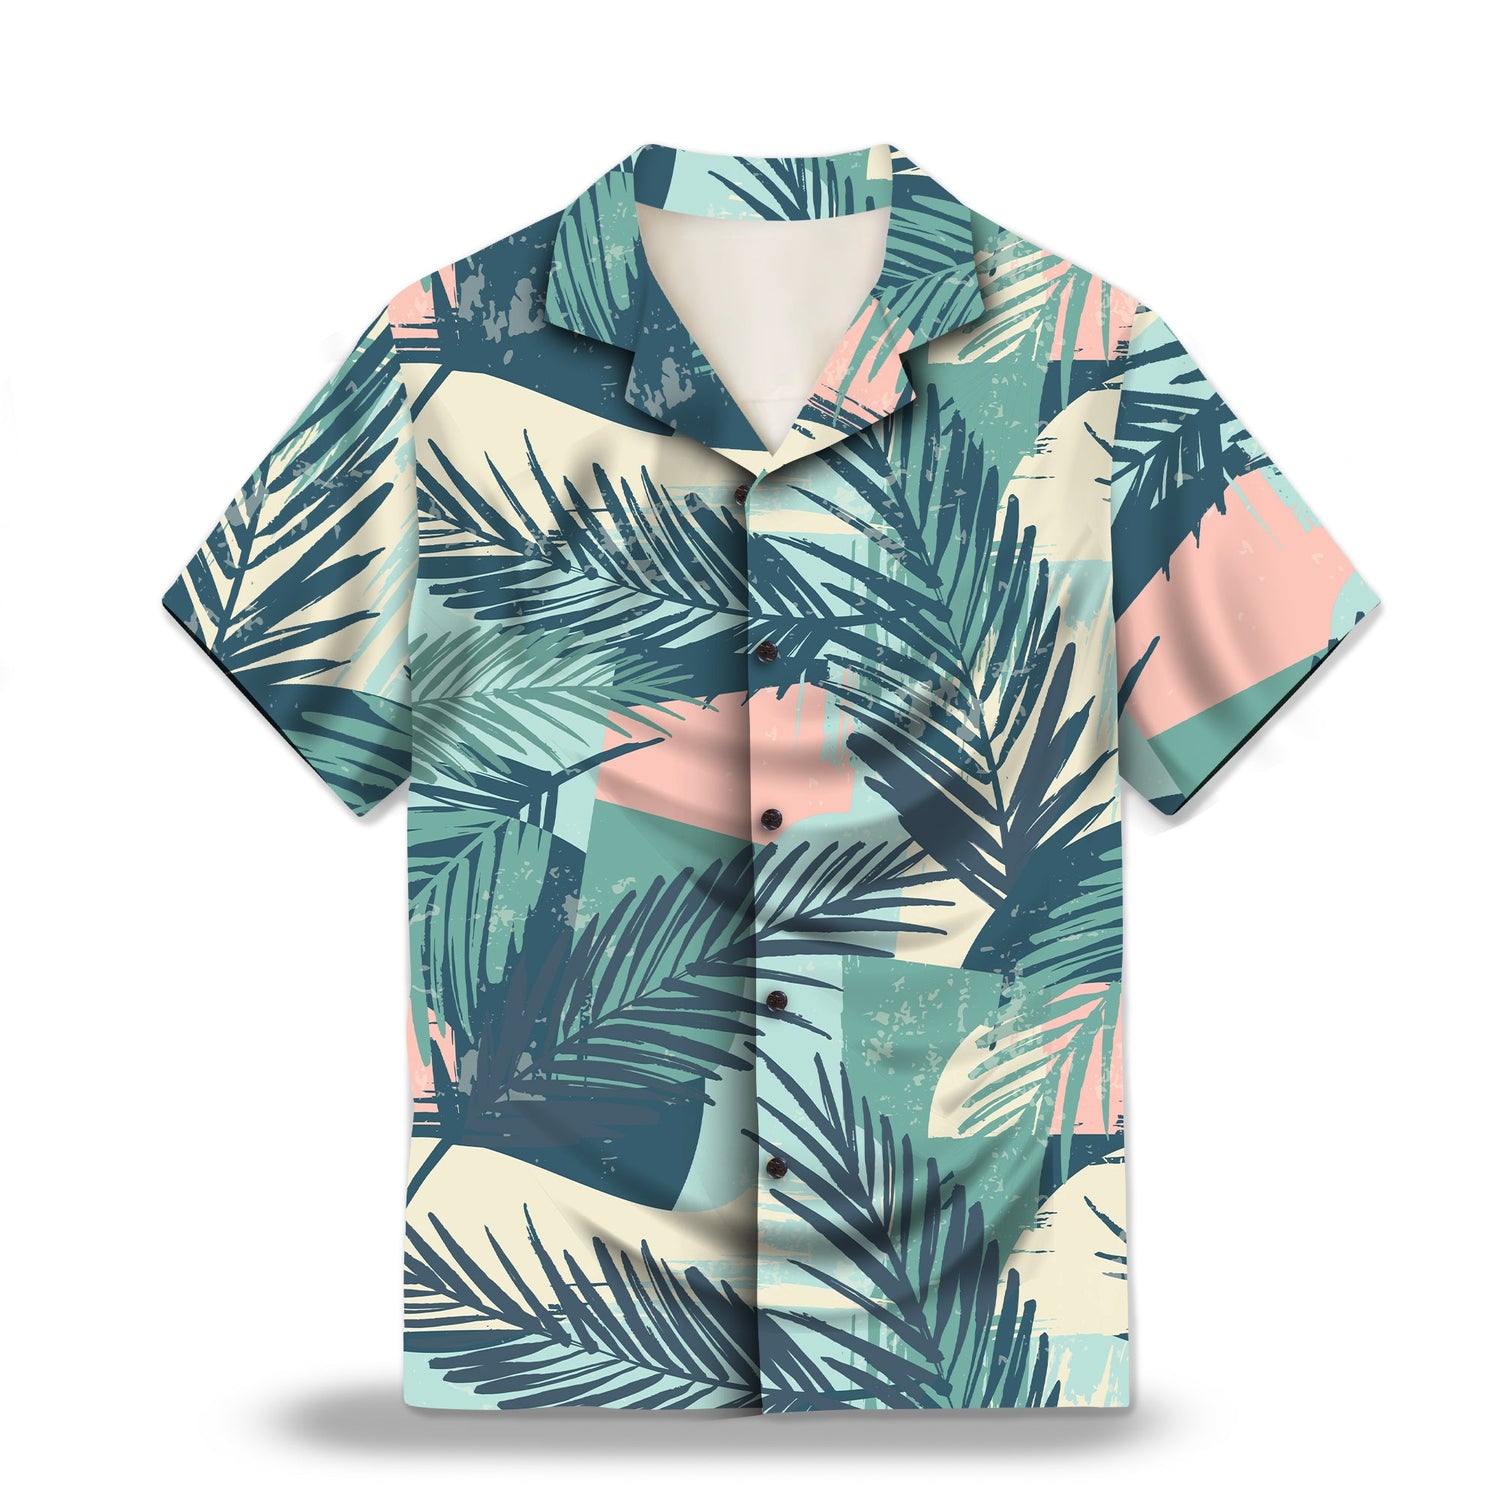 Image: Color Block Palm Leaf Custom Hawaiian Shirt. Featuring vibrant color blocks and palm leaf designs, perfect for a tropical summer look. Alt text for accessibility.